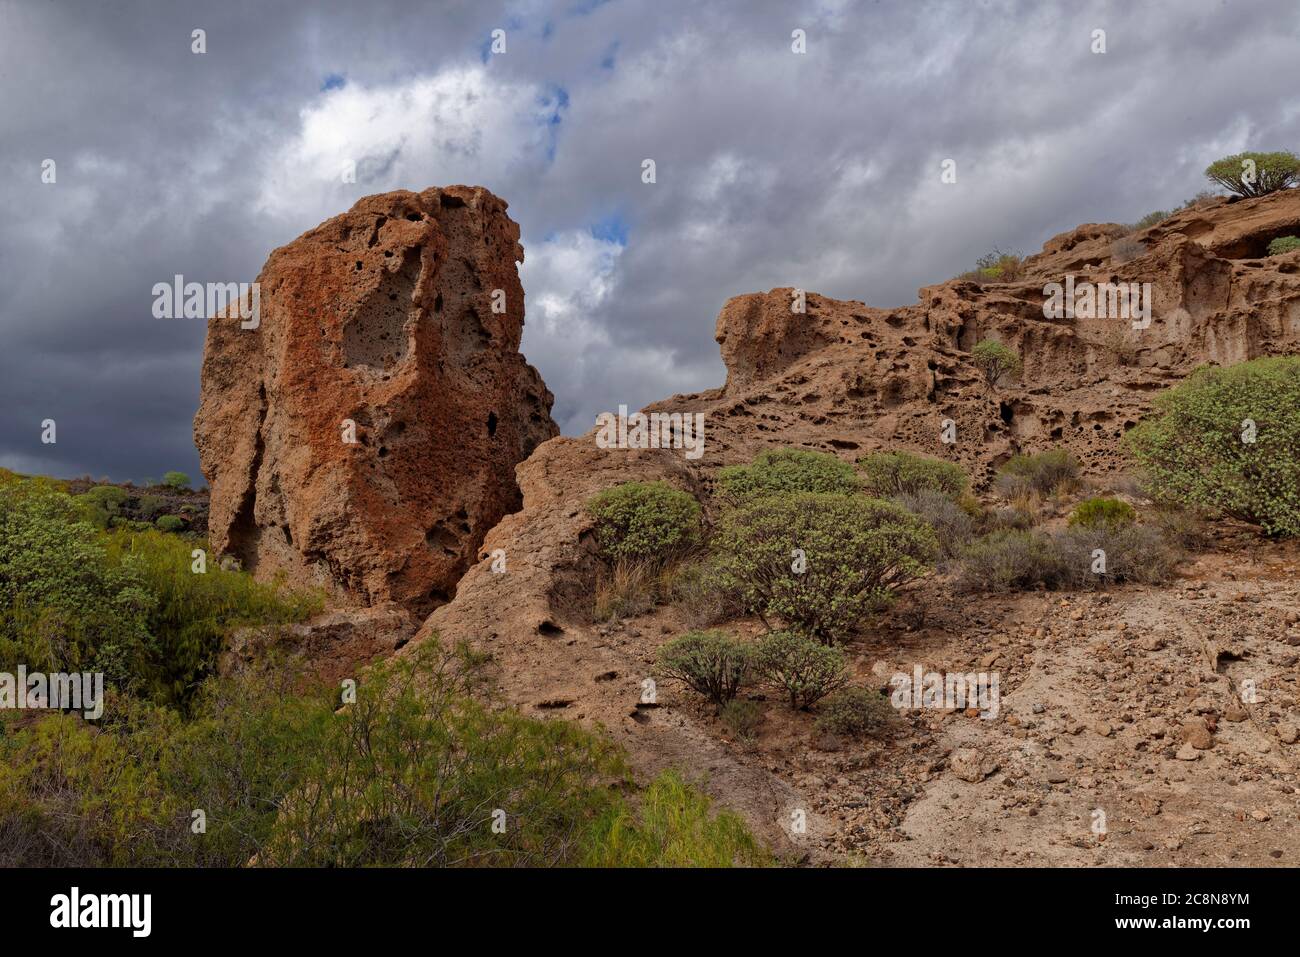 A detached eroded Volcanic Breccia Boulder standing upright on the Valley Floor of a Nature Reserve in Tenerife. Stock Photo